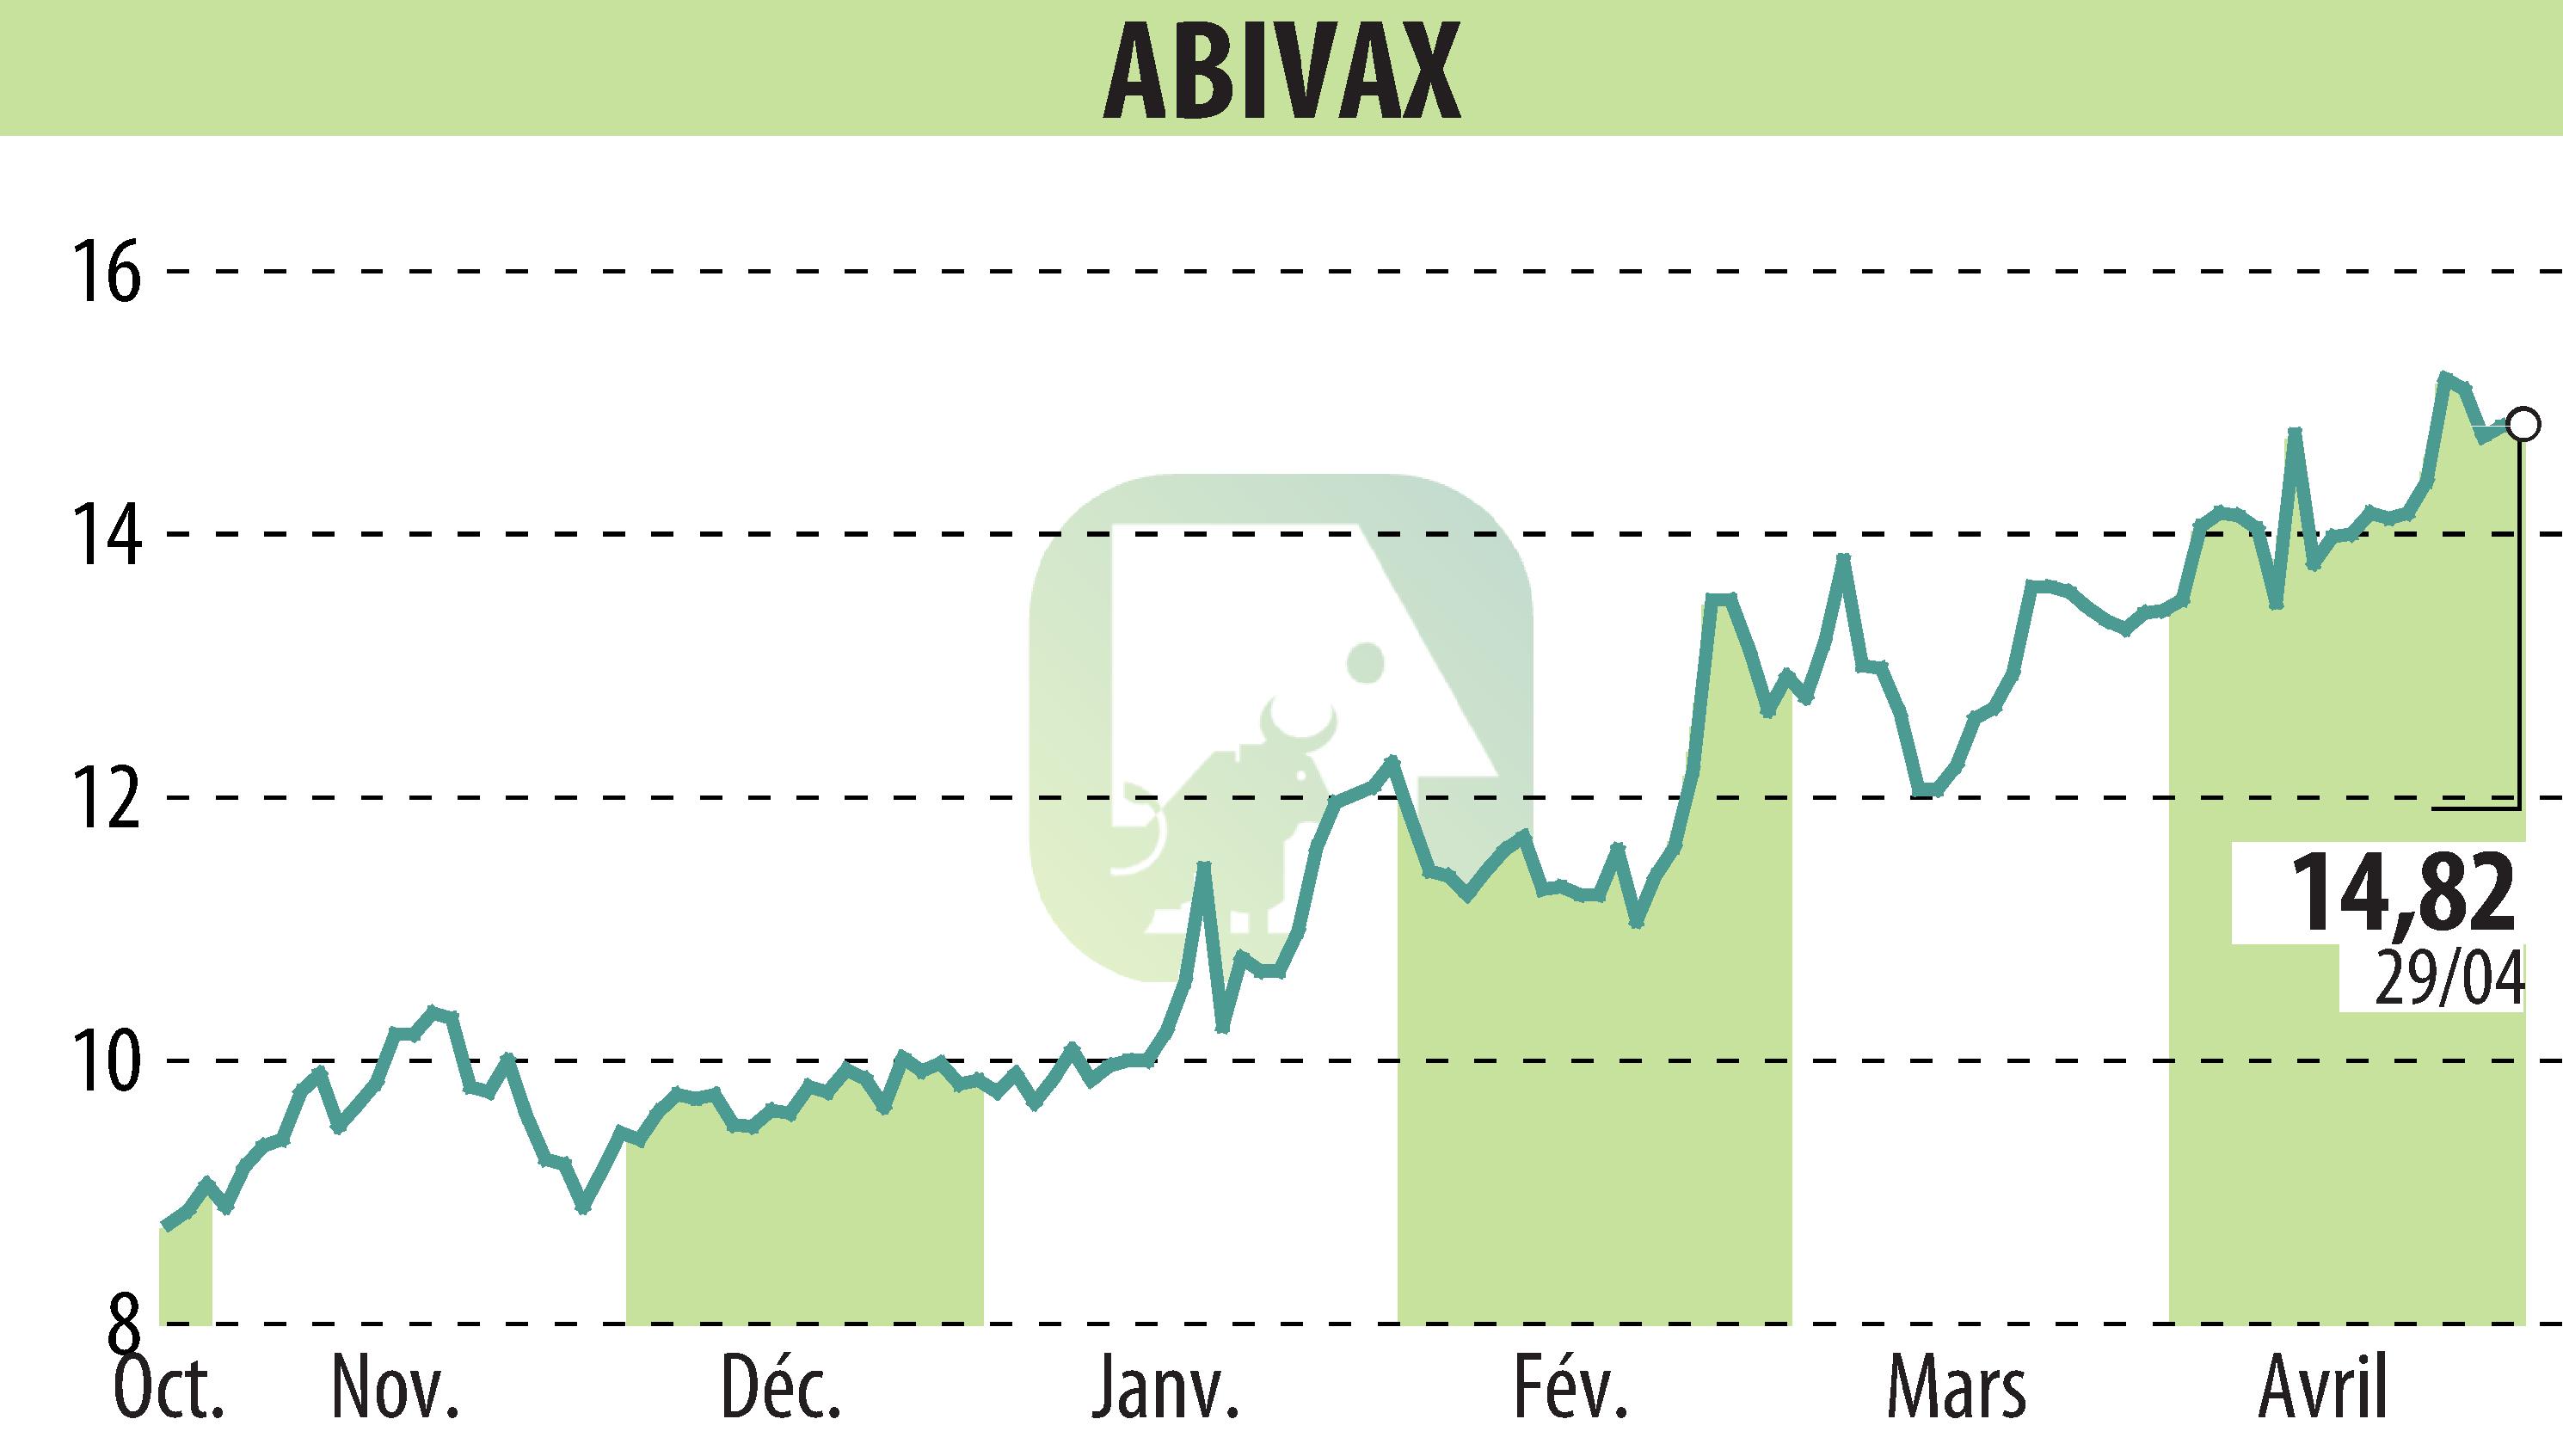 Stock price chart of ABIVAX (EPA:ABVX) showing fluctuations.